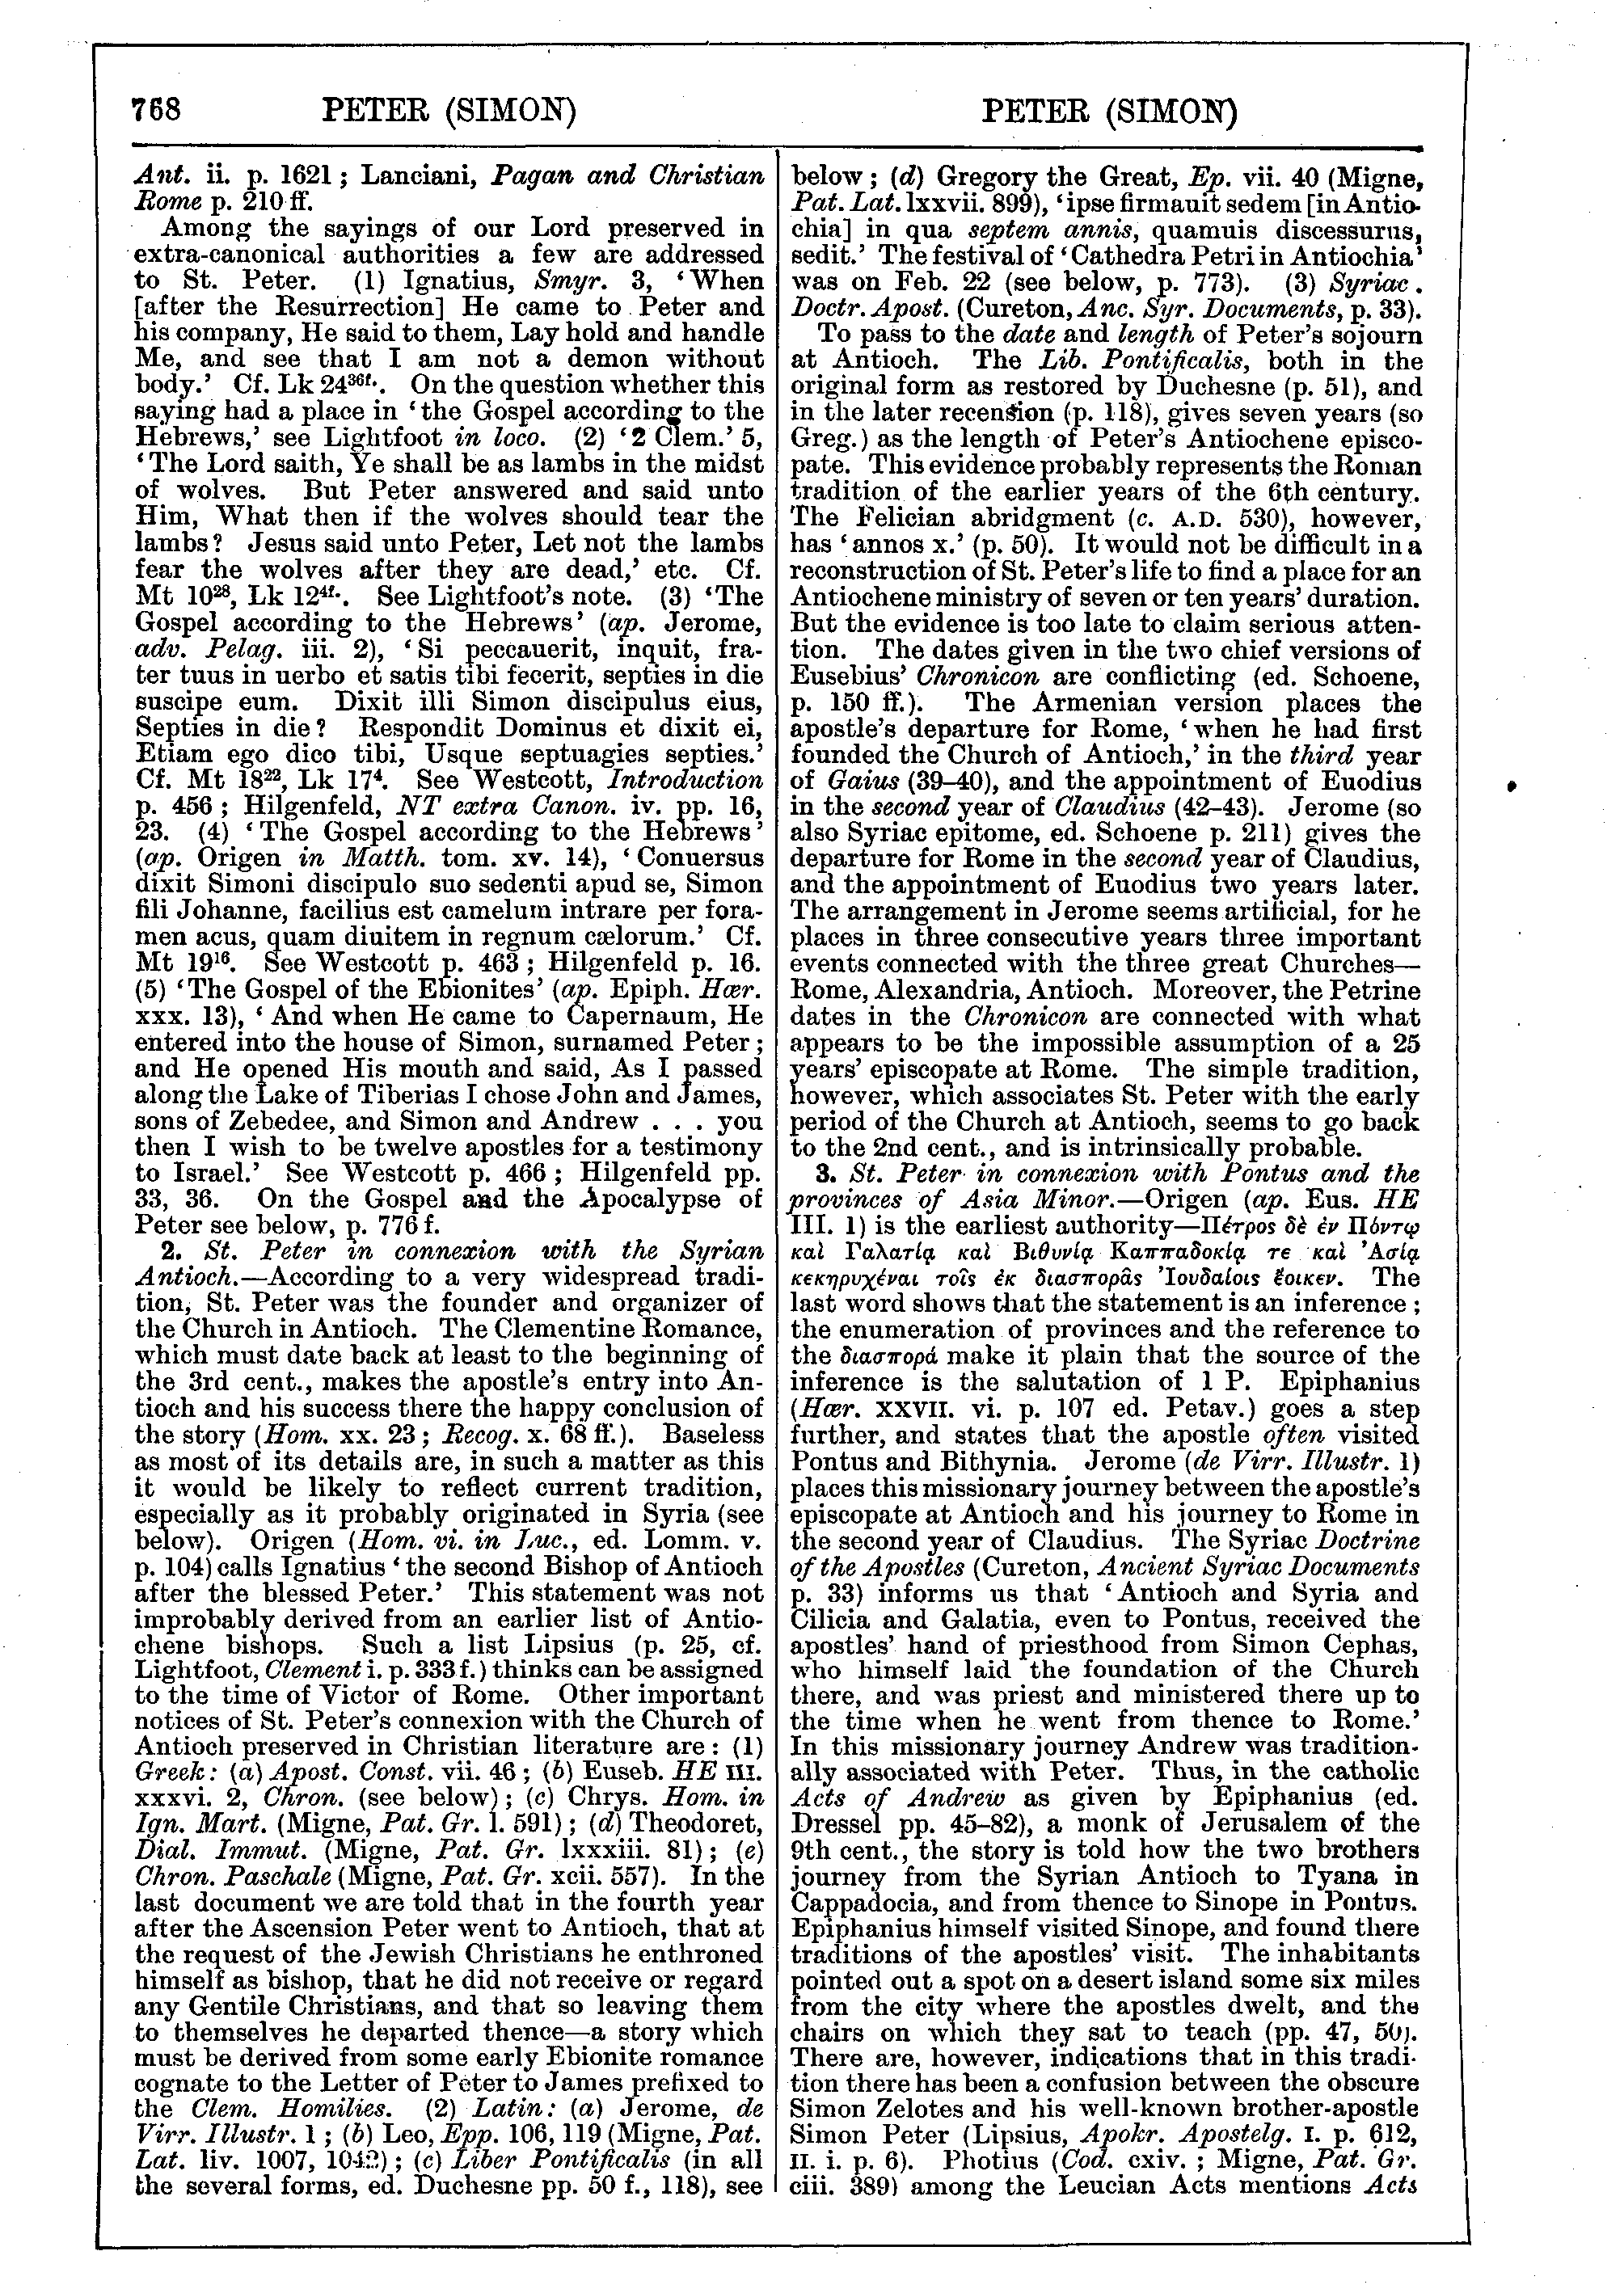 Image of page 768